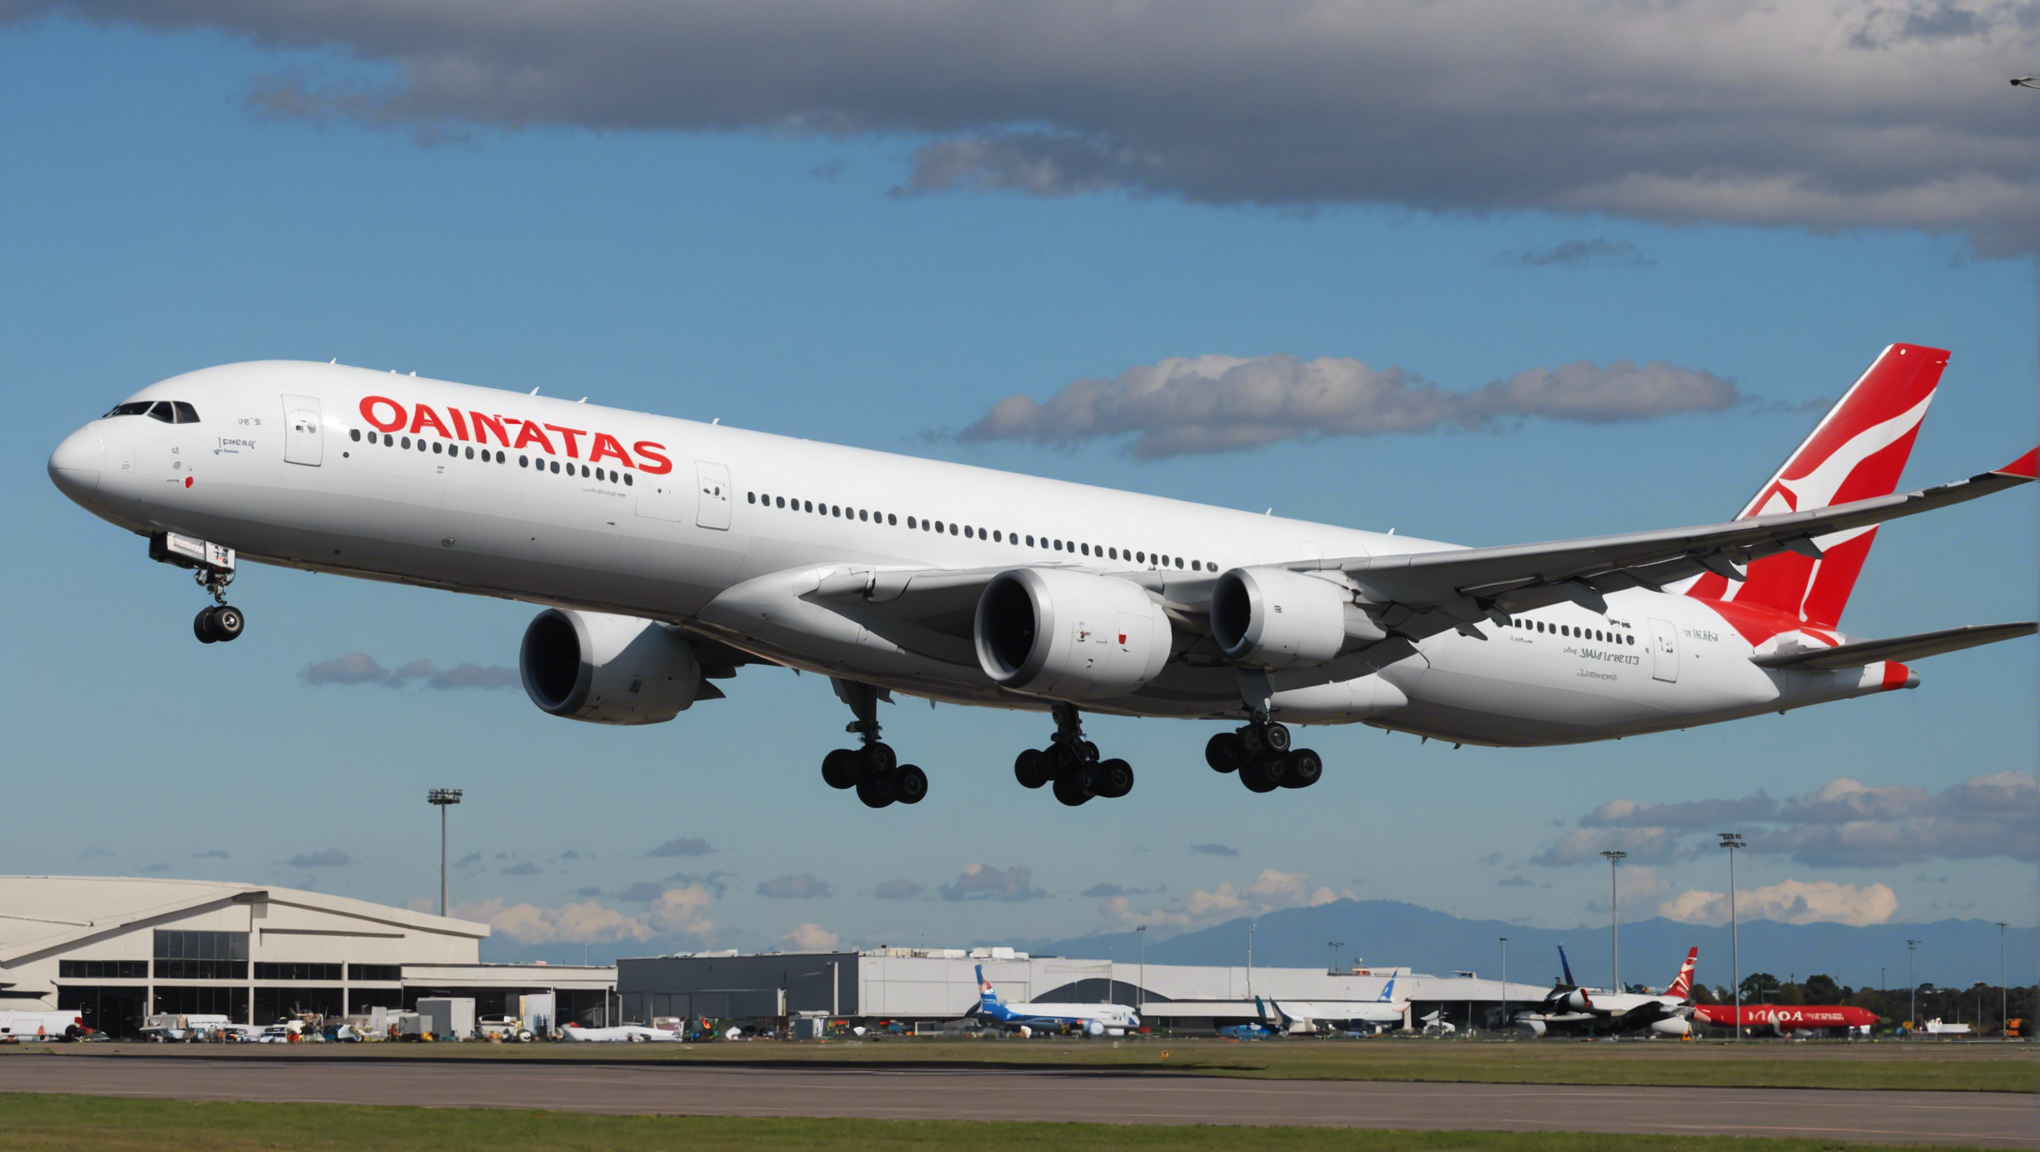 find out how the qantas airbus a350-1000 obtained certification for its additional fuel tank as part of project sunrise.